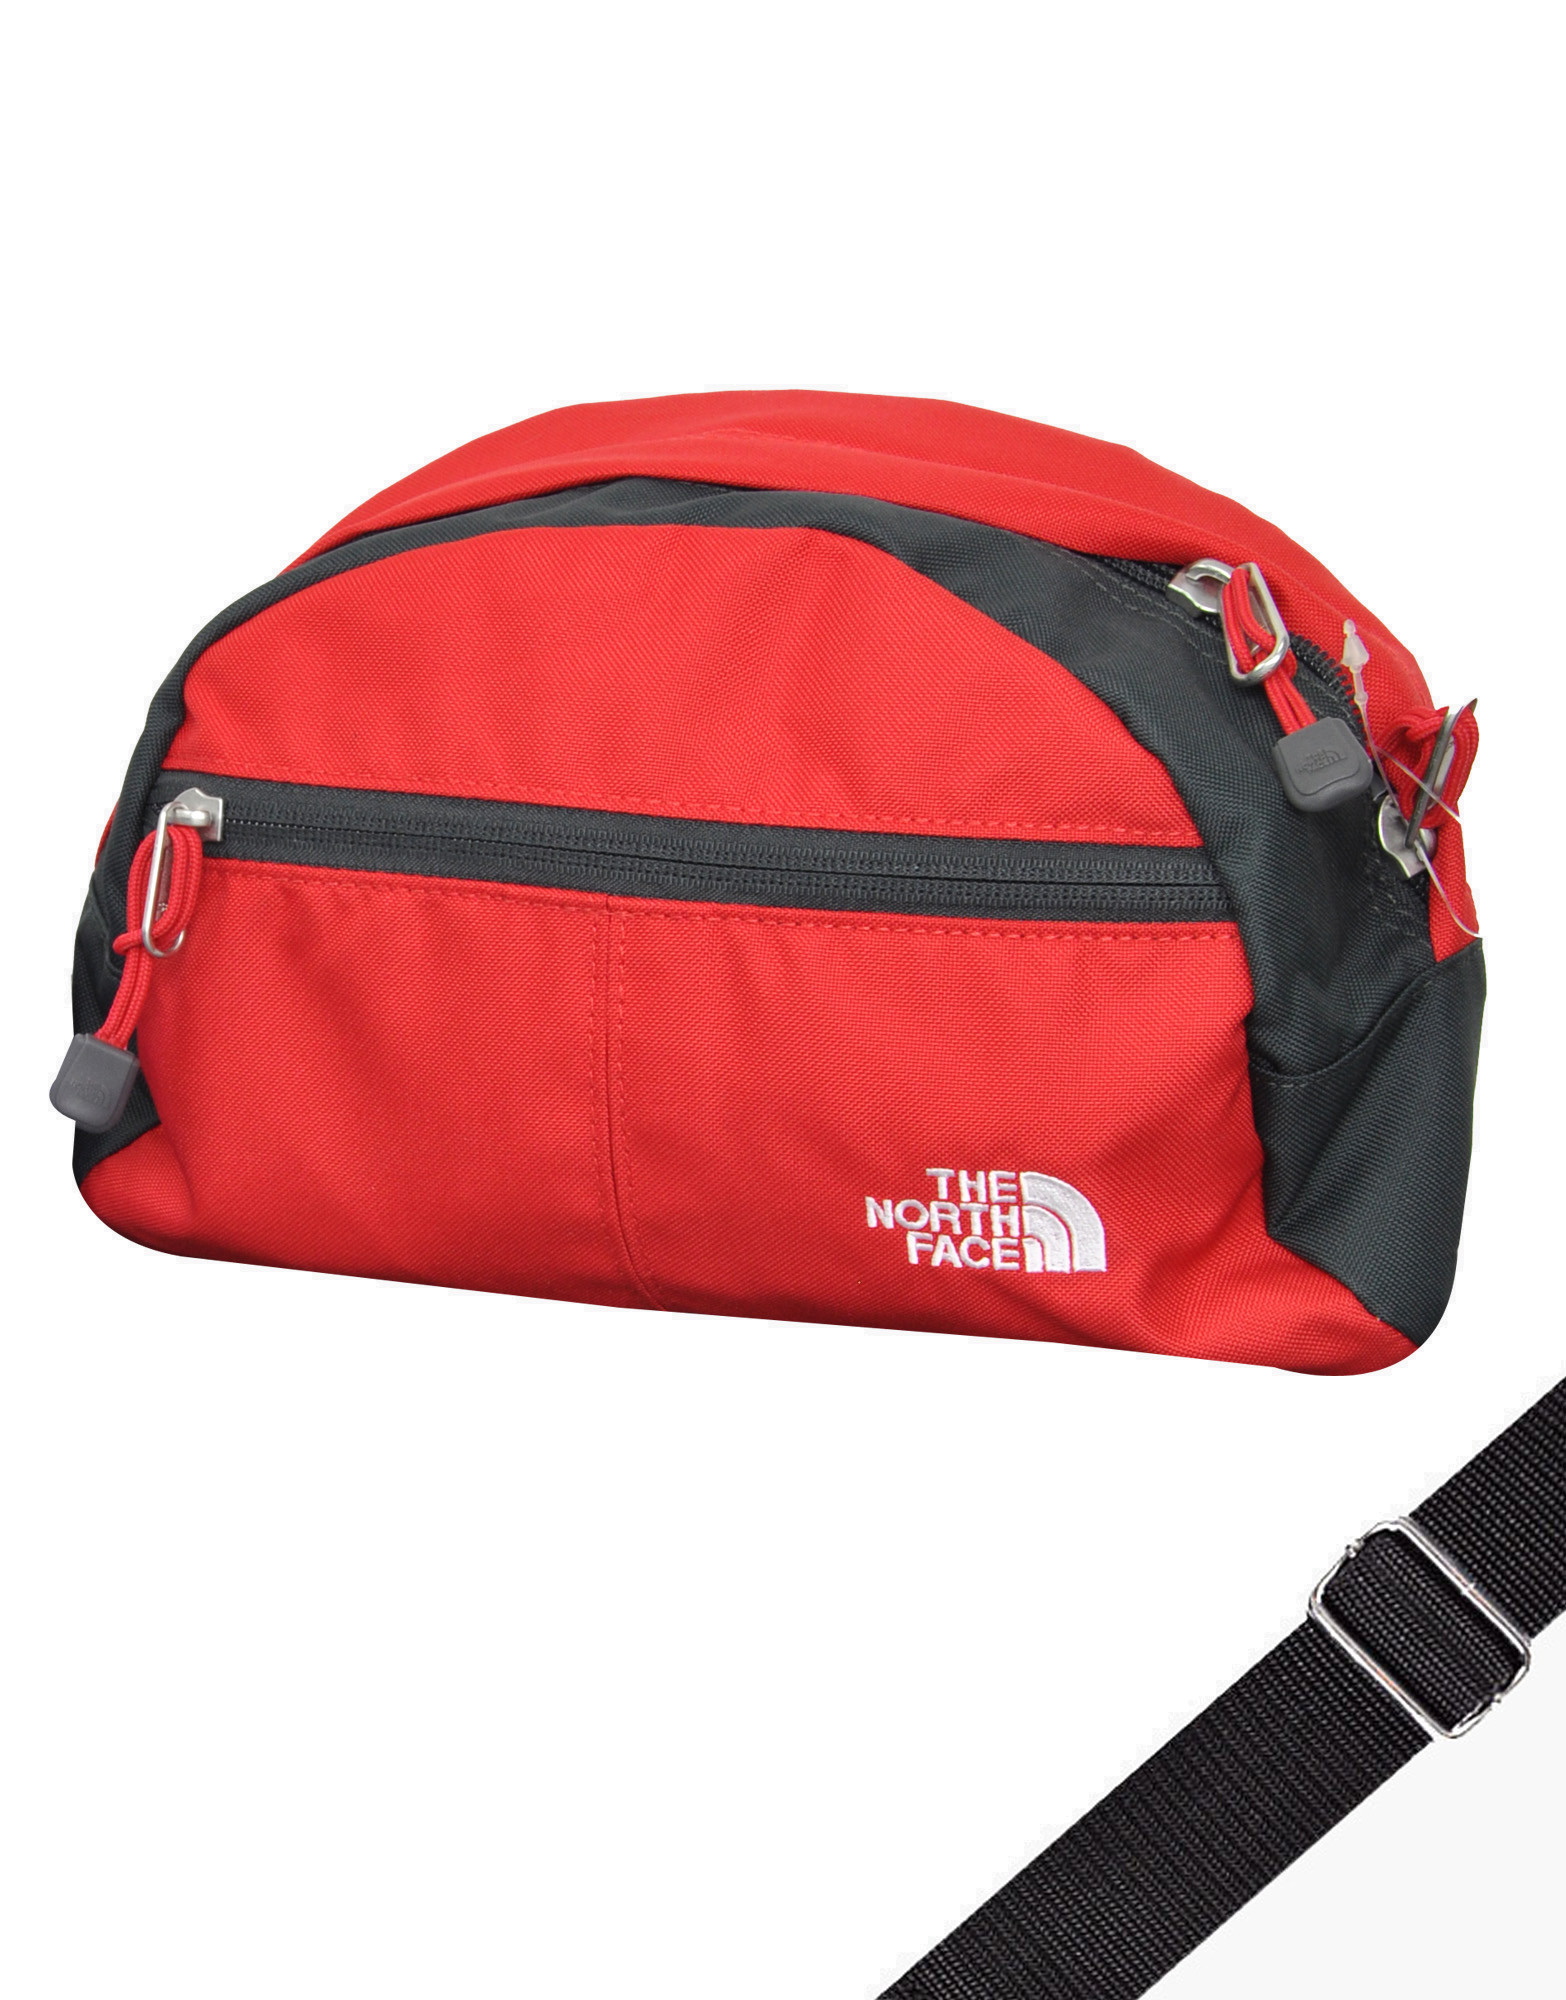 north face fanny pack red